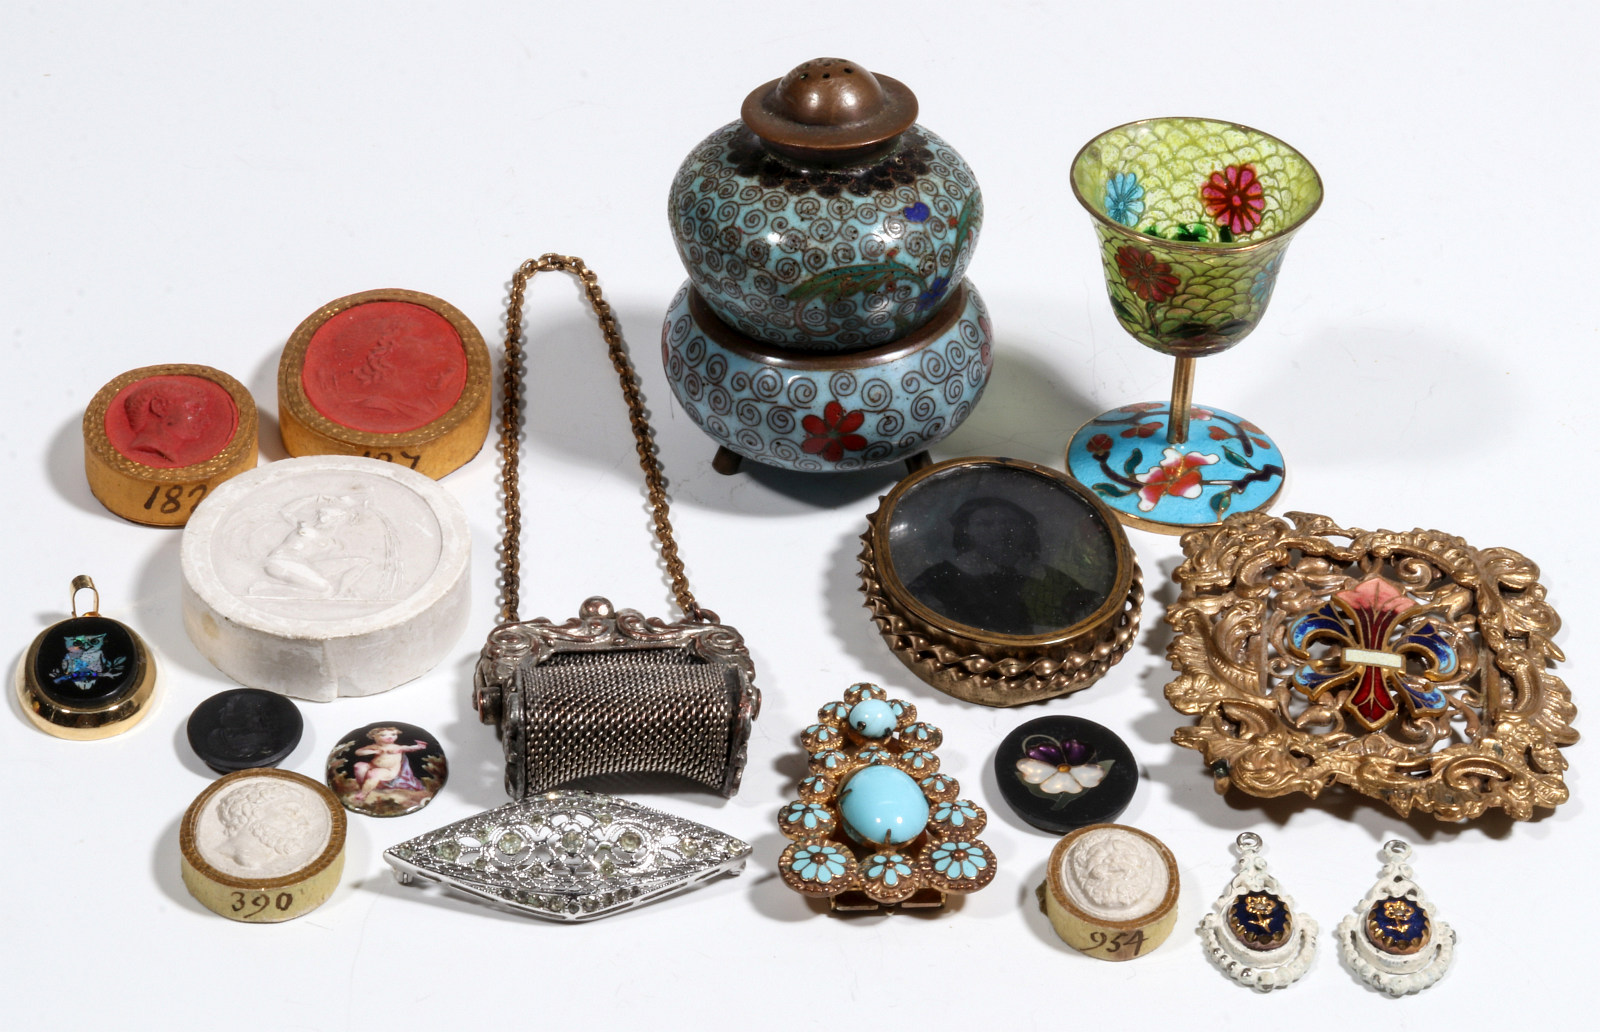 A COLLECTION OF ENAMELED AND OTHER ANTIQUE OBJECTS